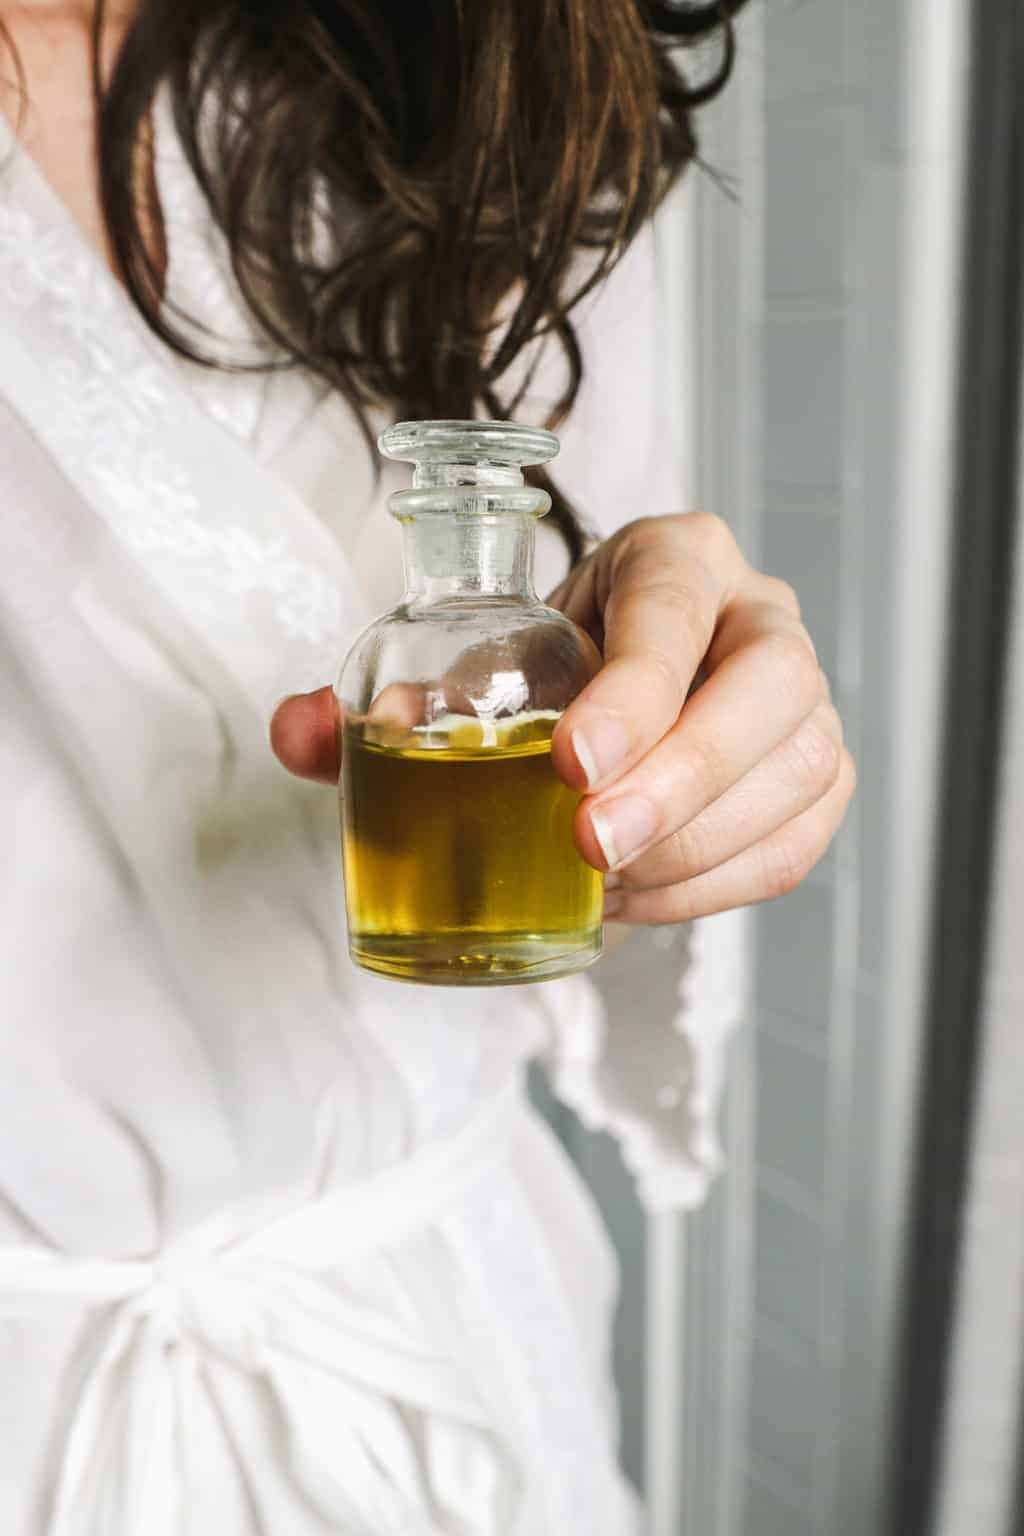 15 Kitchen Beauty Ingredients - Olive Oil | HelloGlow.co